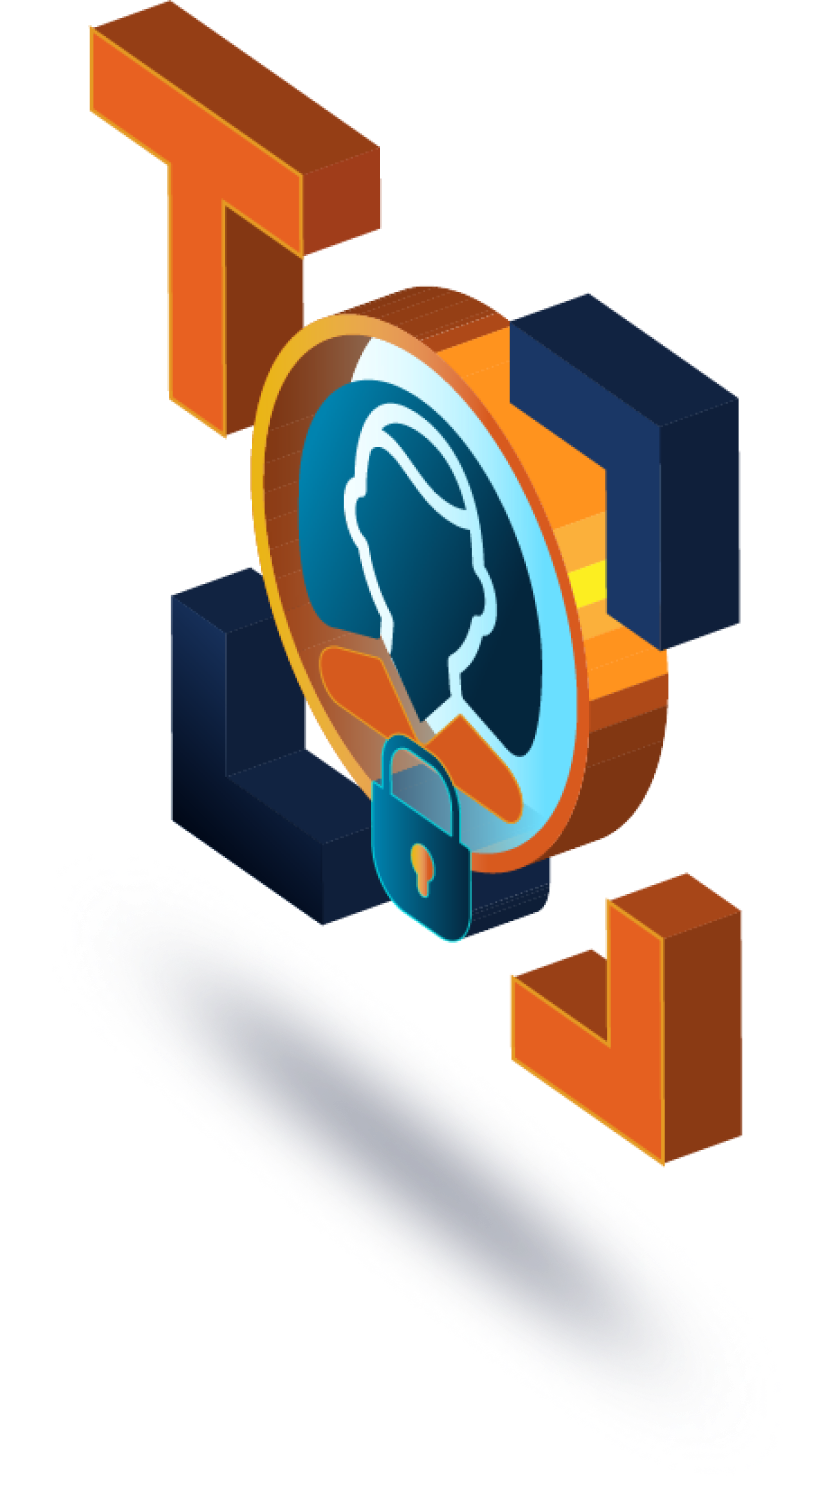 A blue and orange logo with a lock on it.